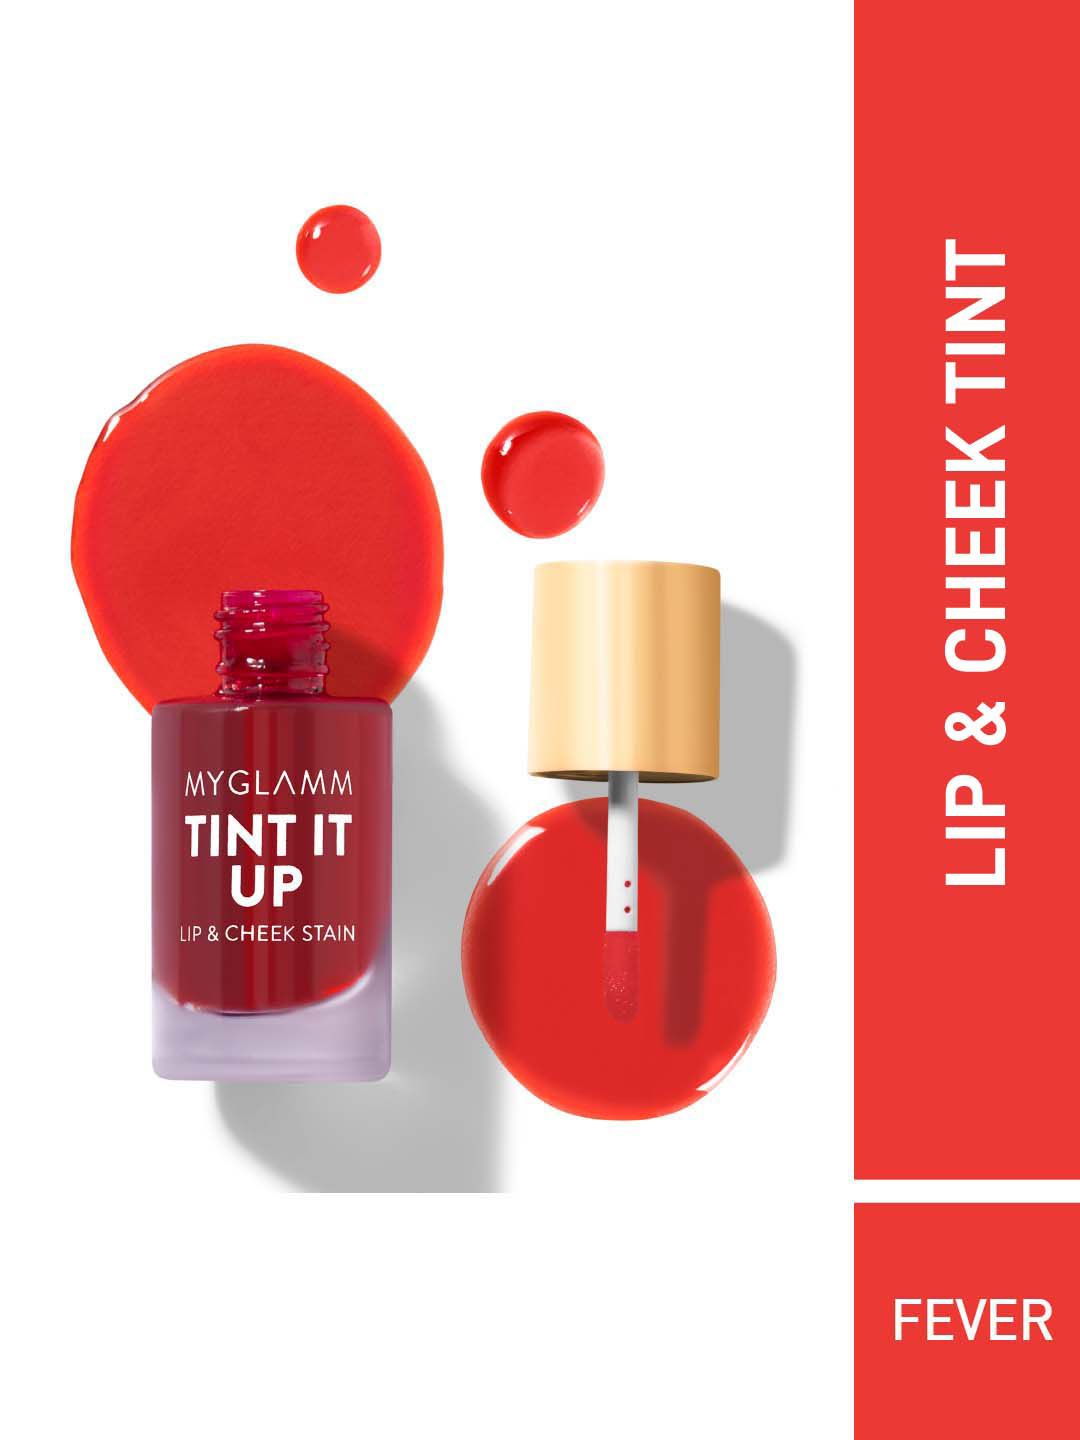 MyGlamm Tint It Up 8.5 ml - Fever Price in India